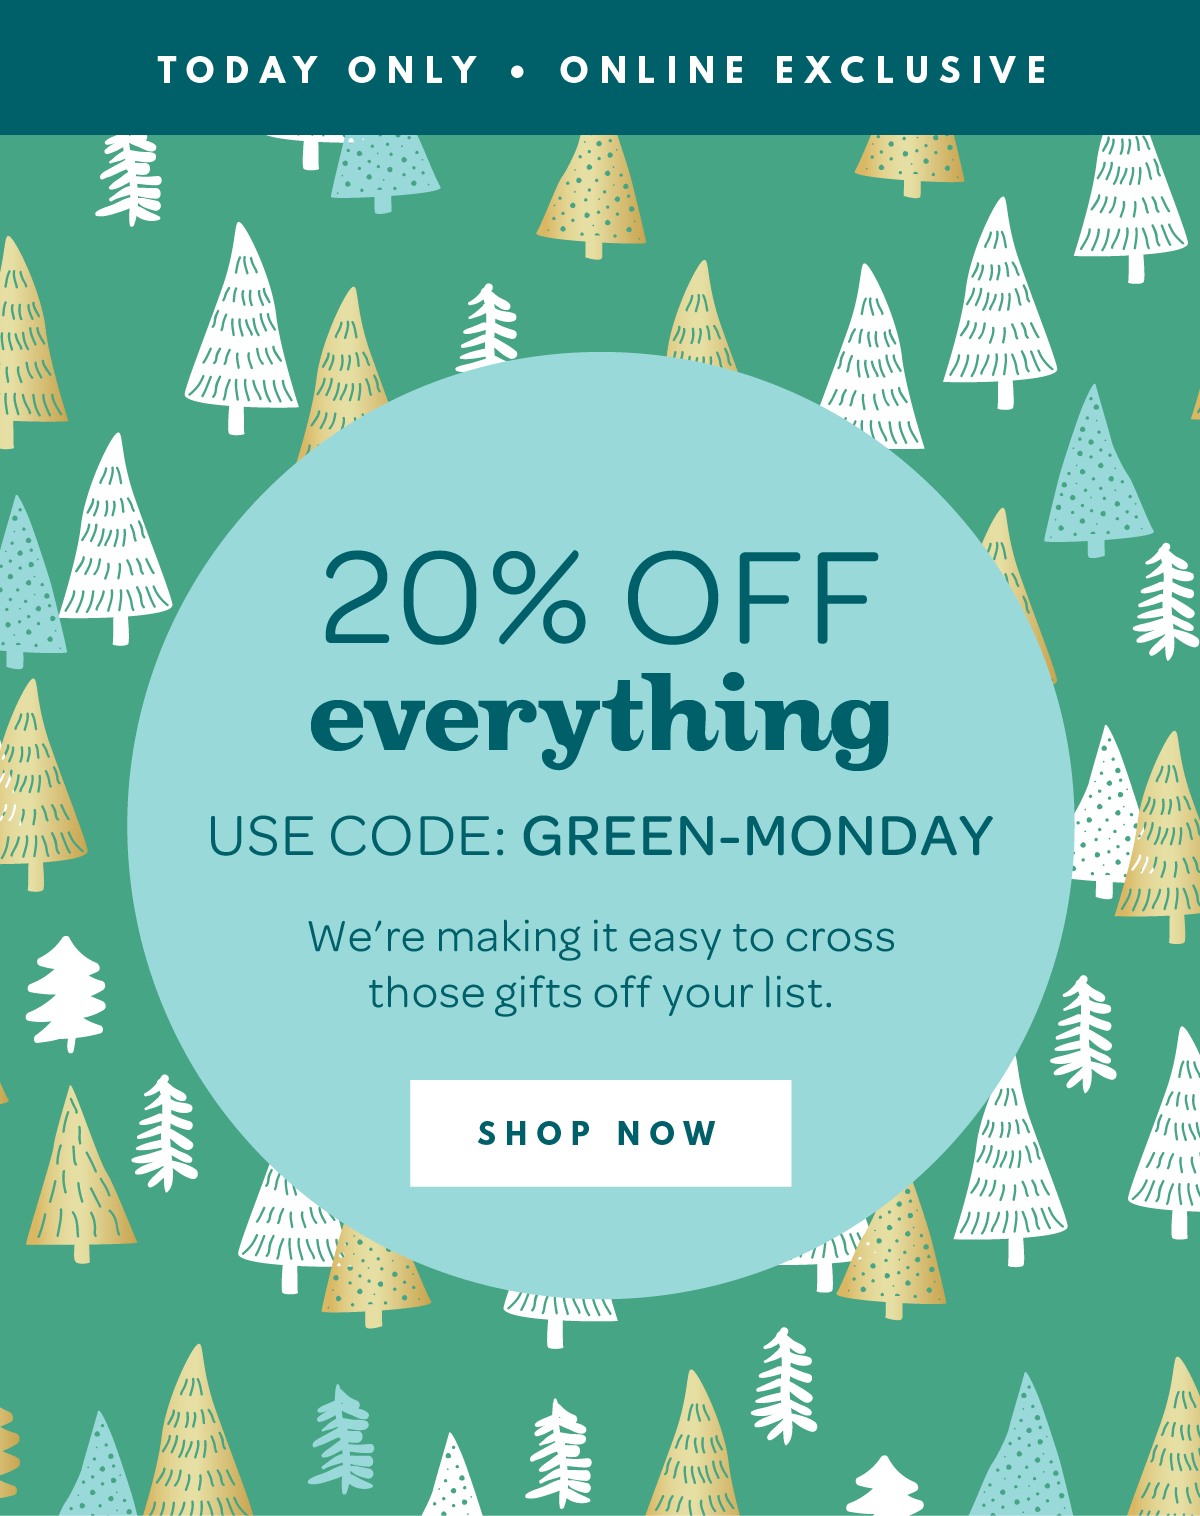 Get 20% off everything for Green Monday